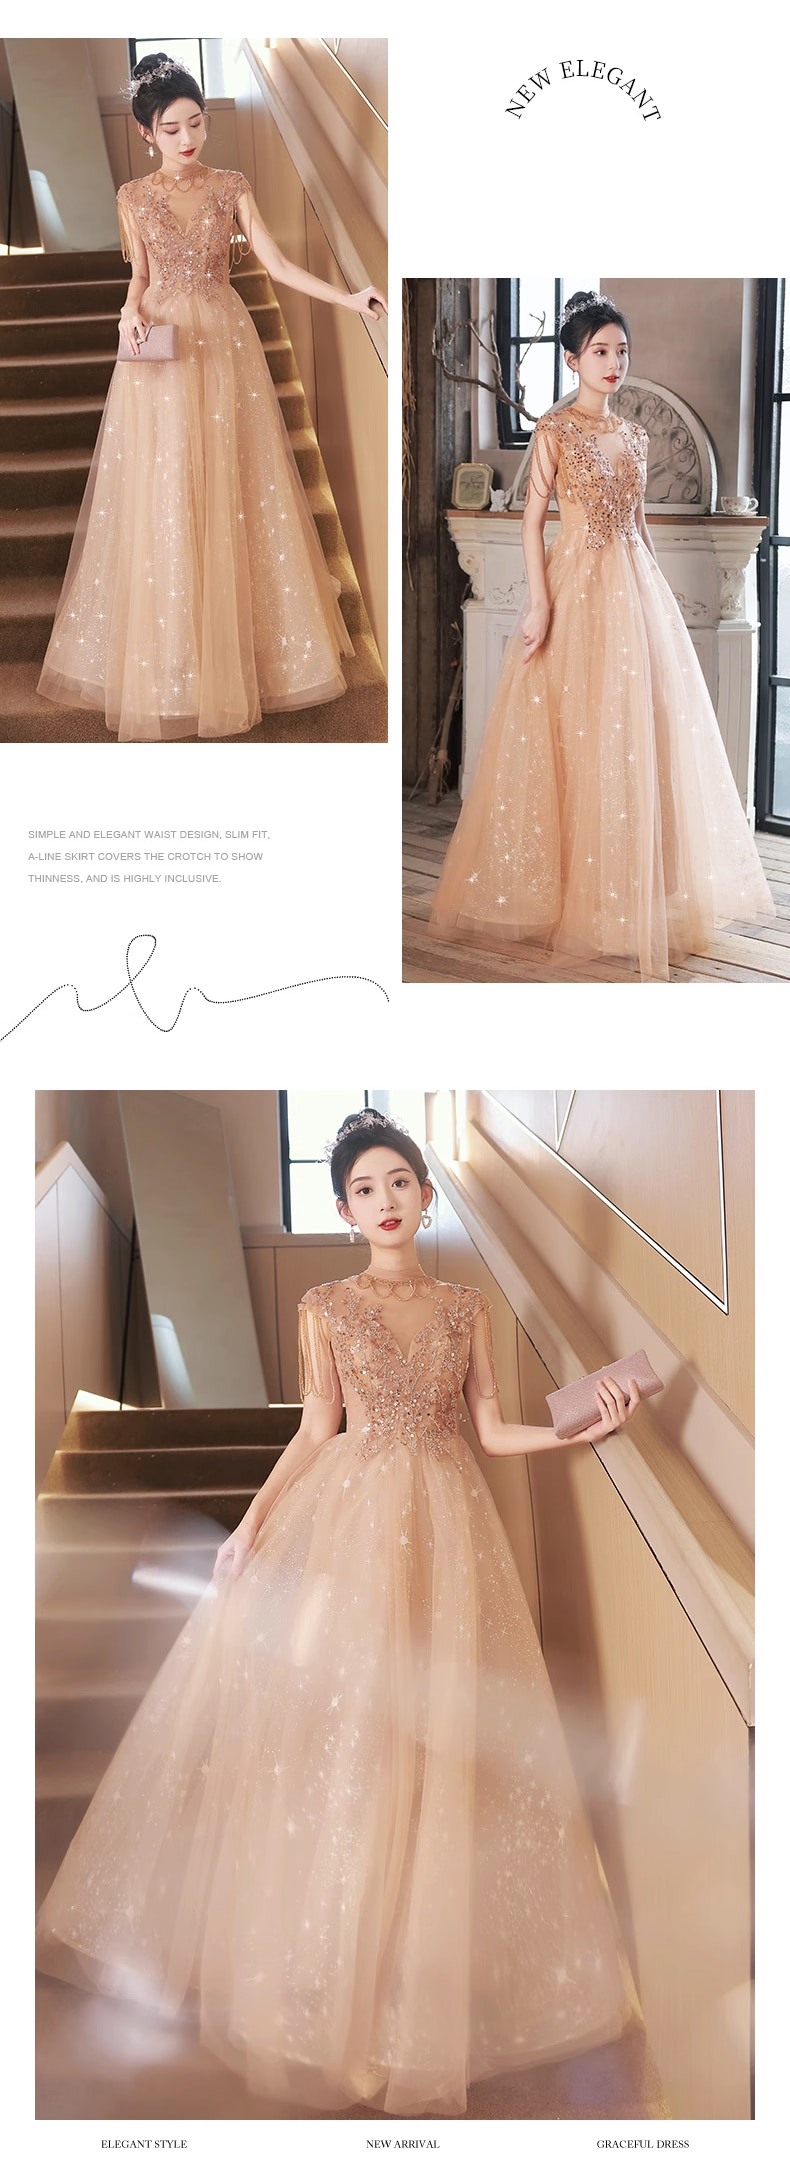 Chic-Champagne-Gold-Cinderella-Princess-Prom-Dress-Evening-Gown13